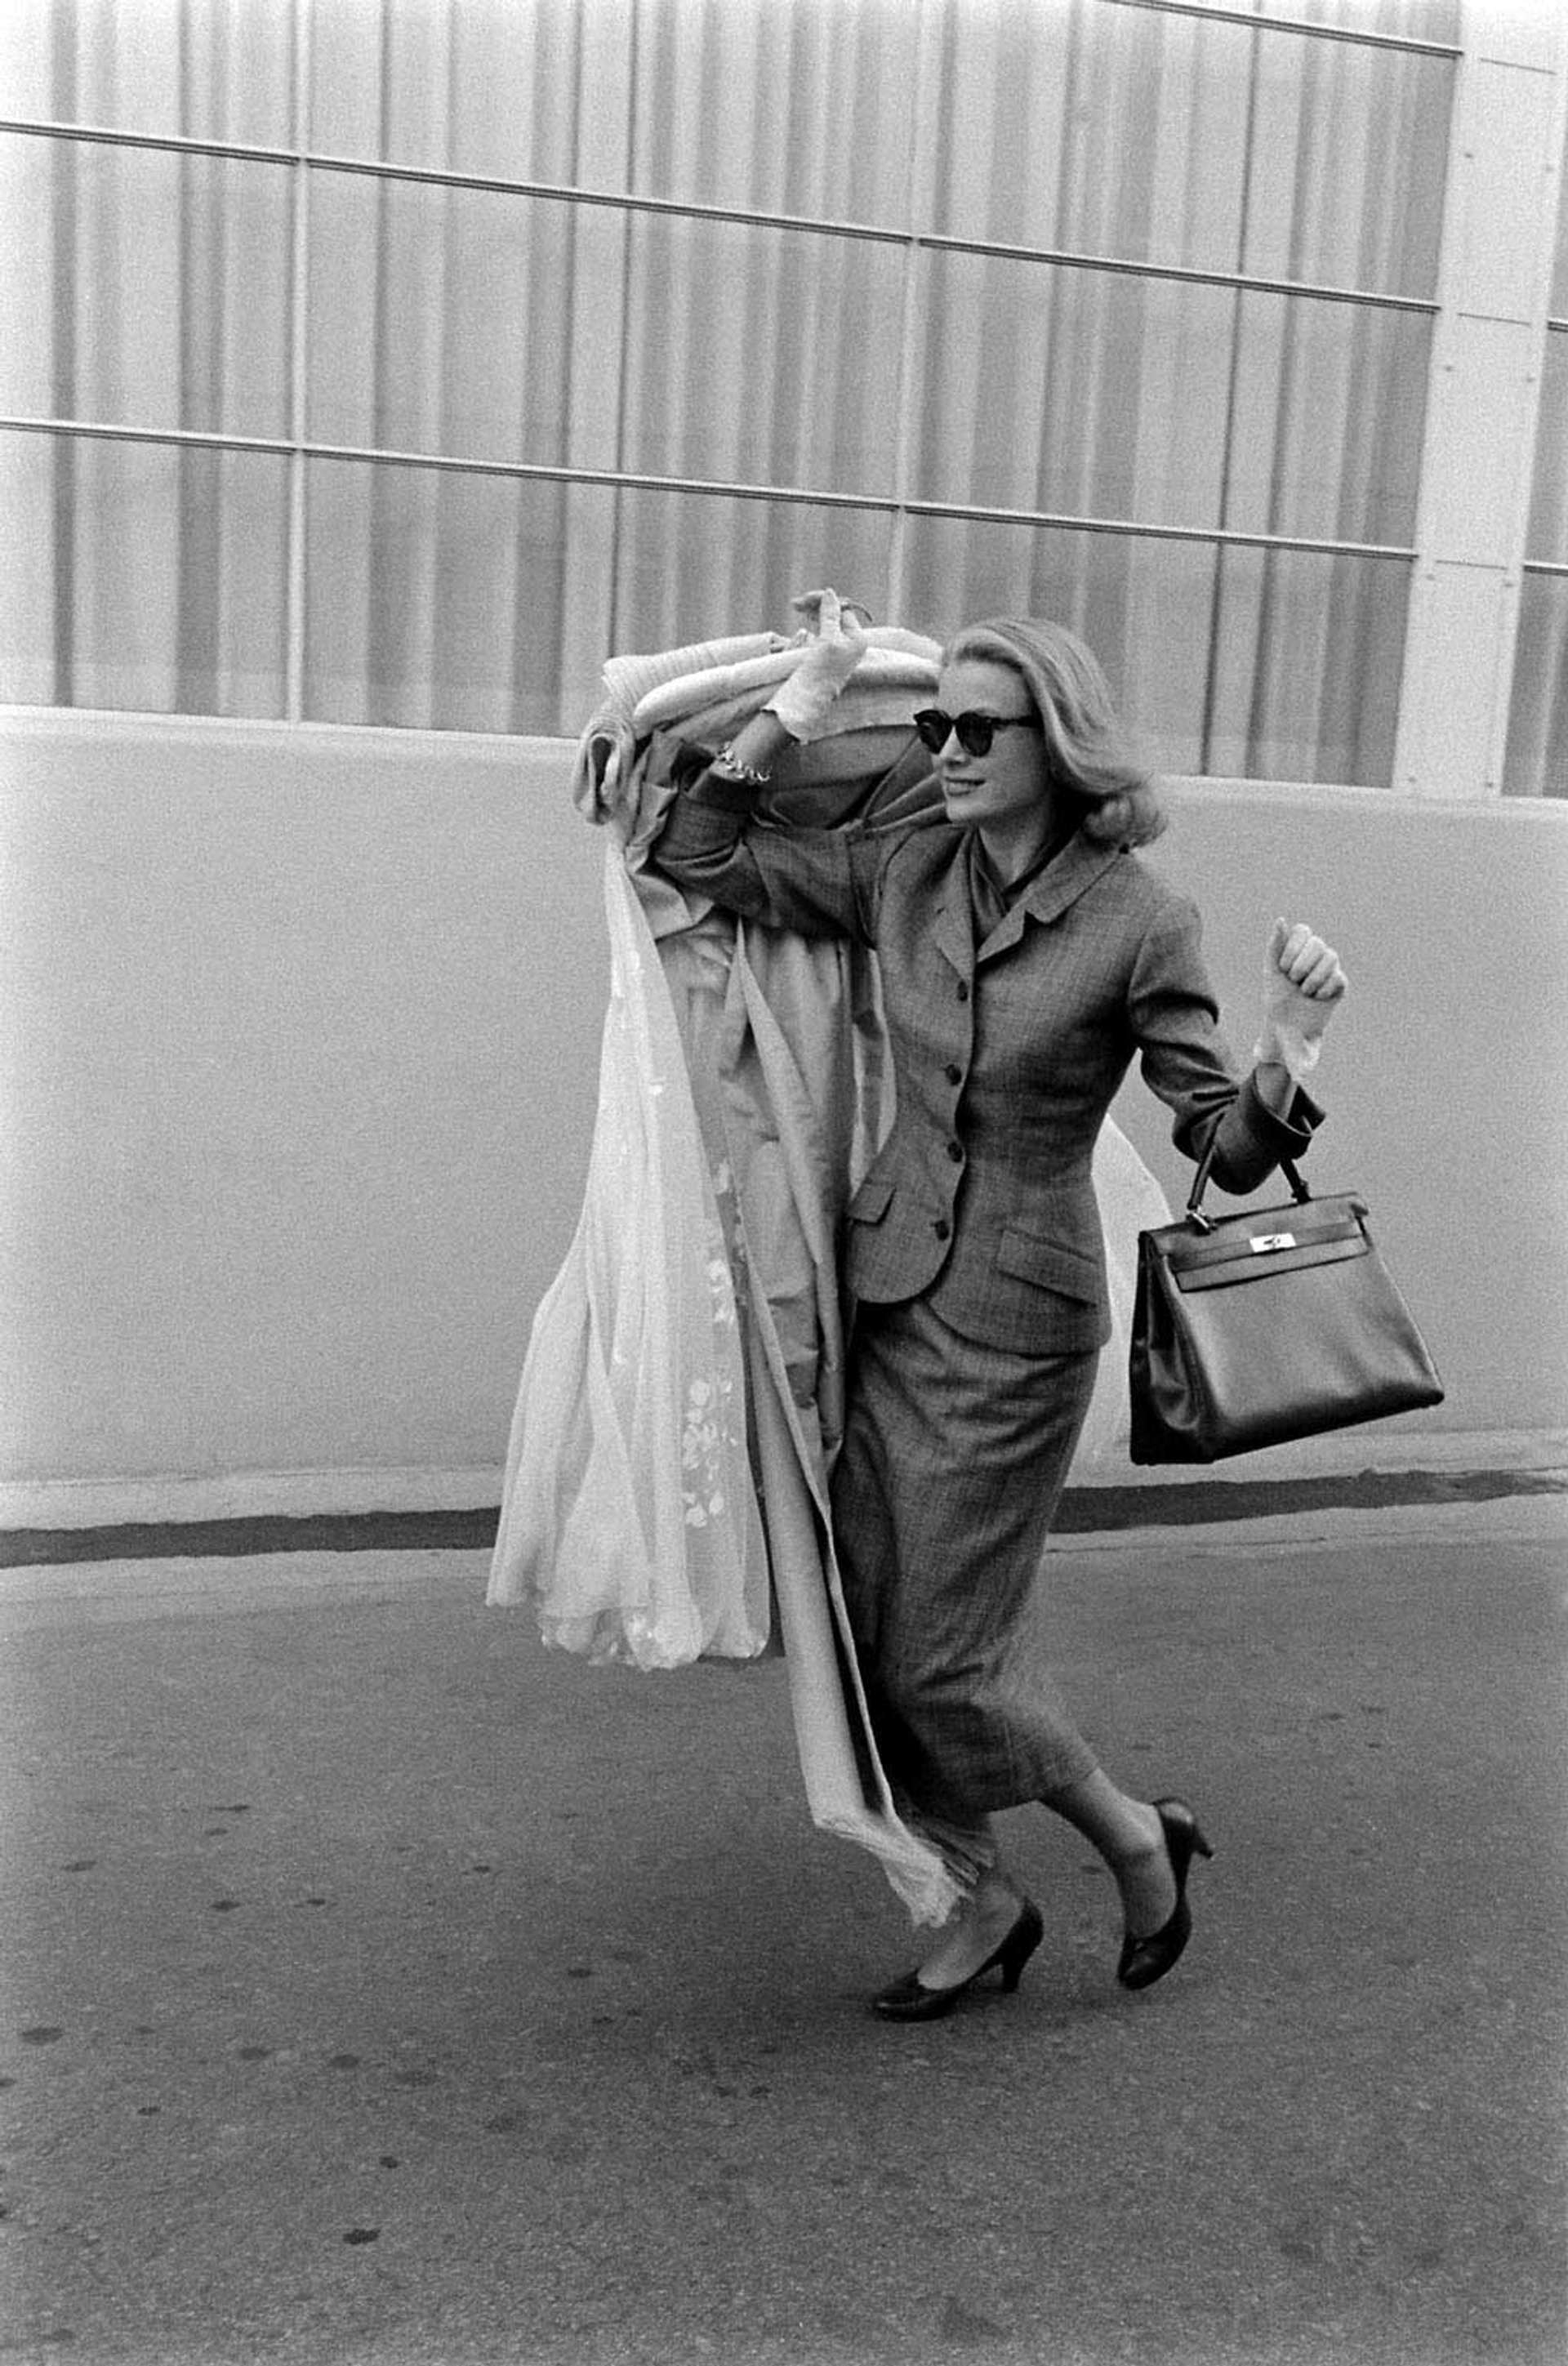 An image of actress Grace Kelly, carrying several clothes and a Kelly bag, leaving the Hollywood Studios she worked on for the last time.]